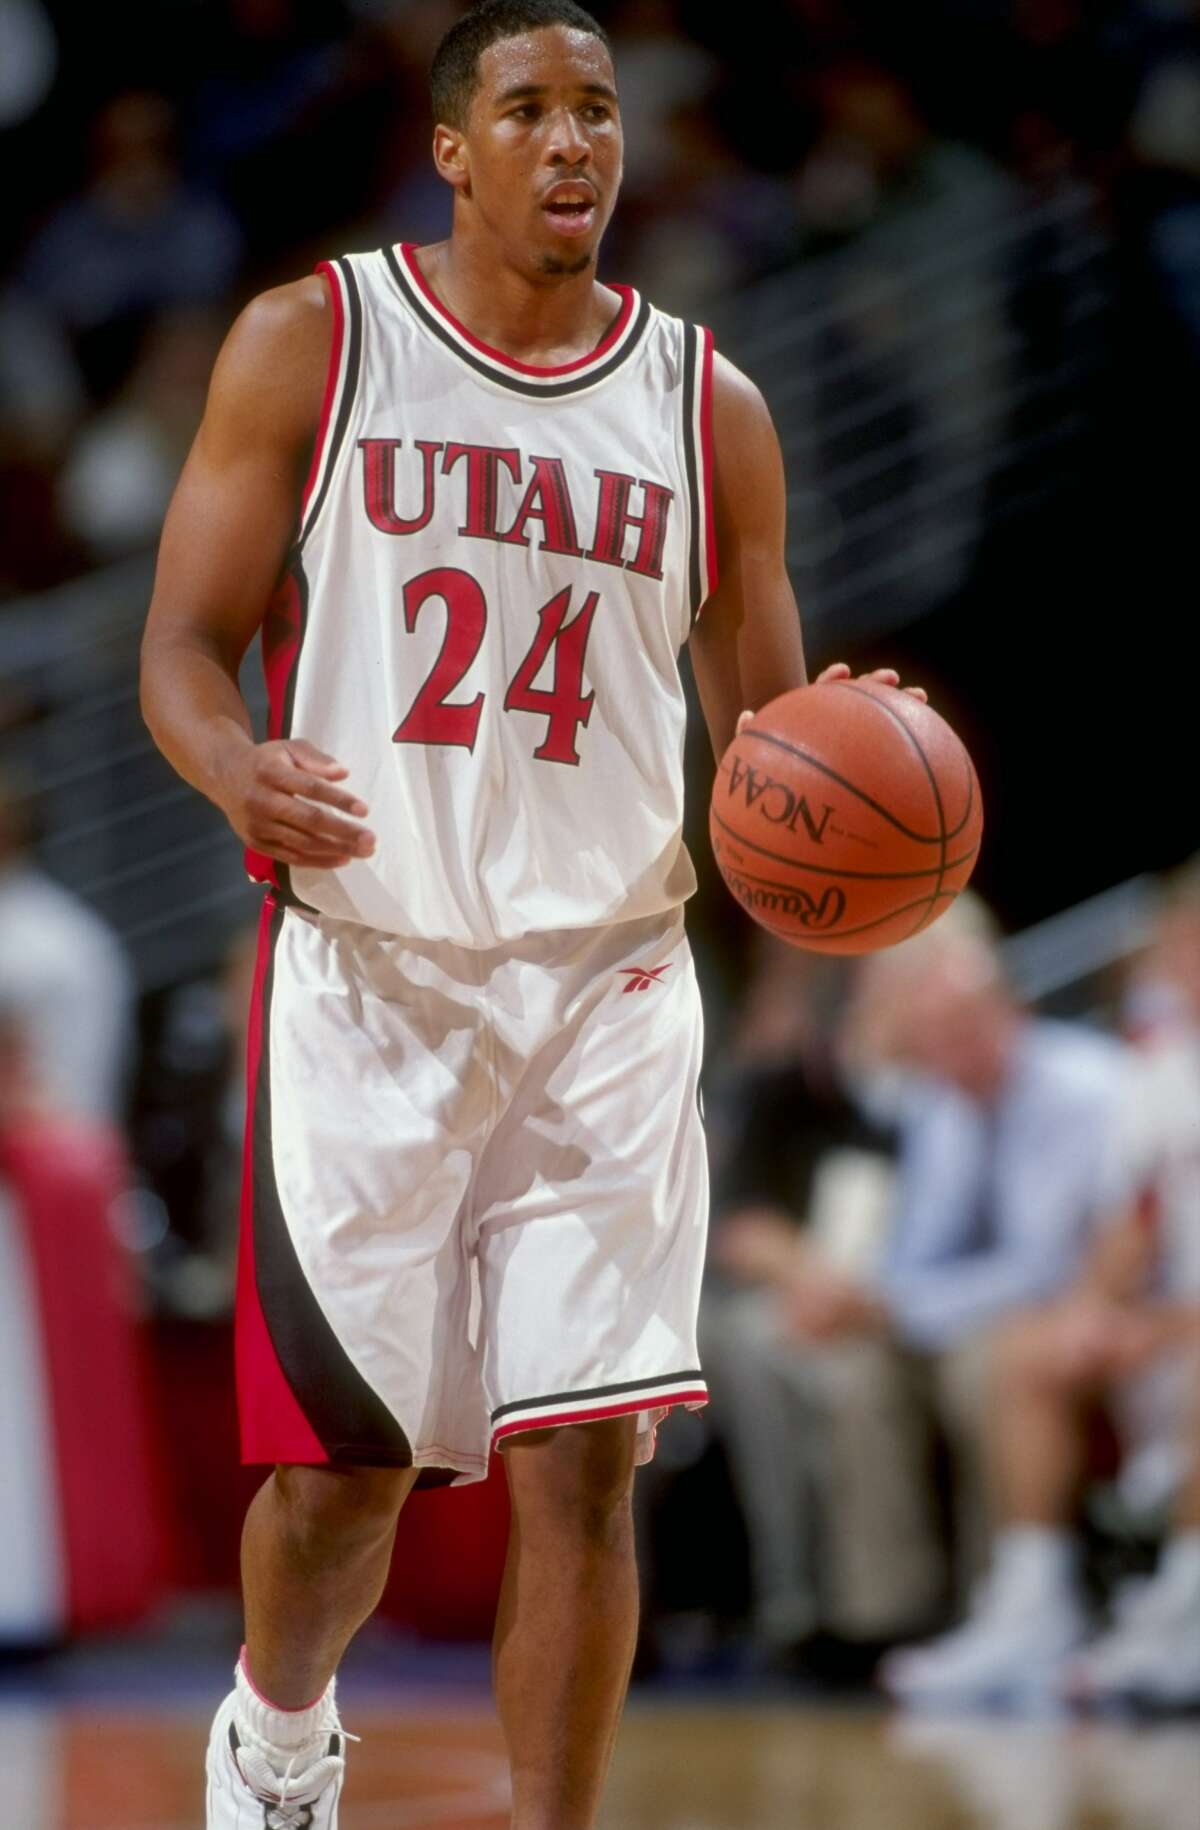 ANDRE MILLER - ONE OF THE GREATEST COLLEGE PLAYERS EVER